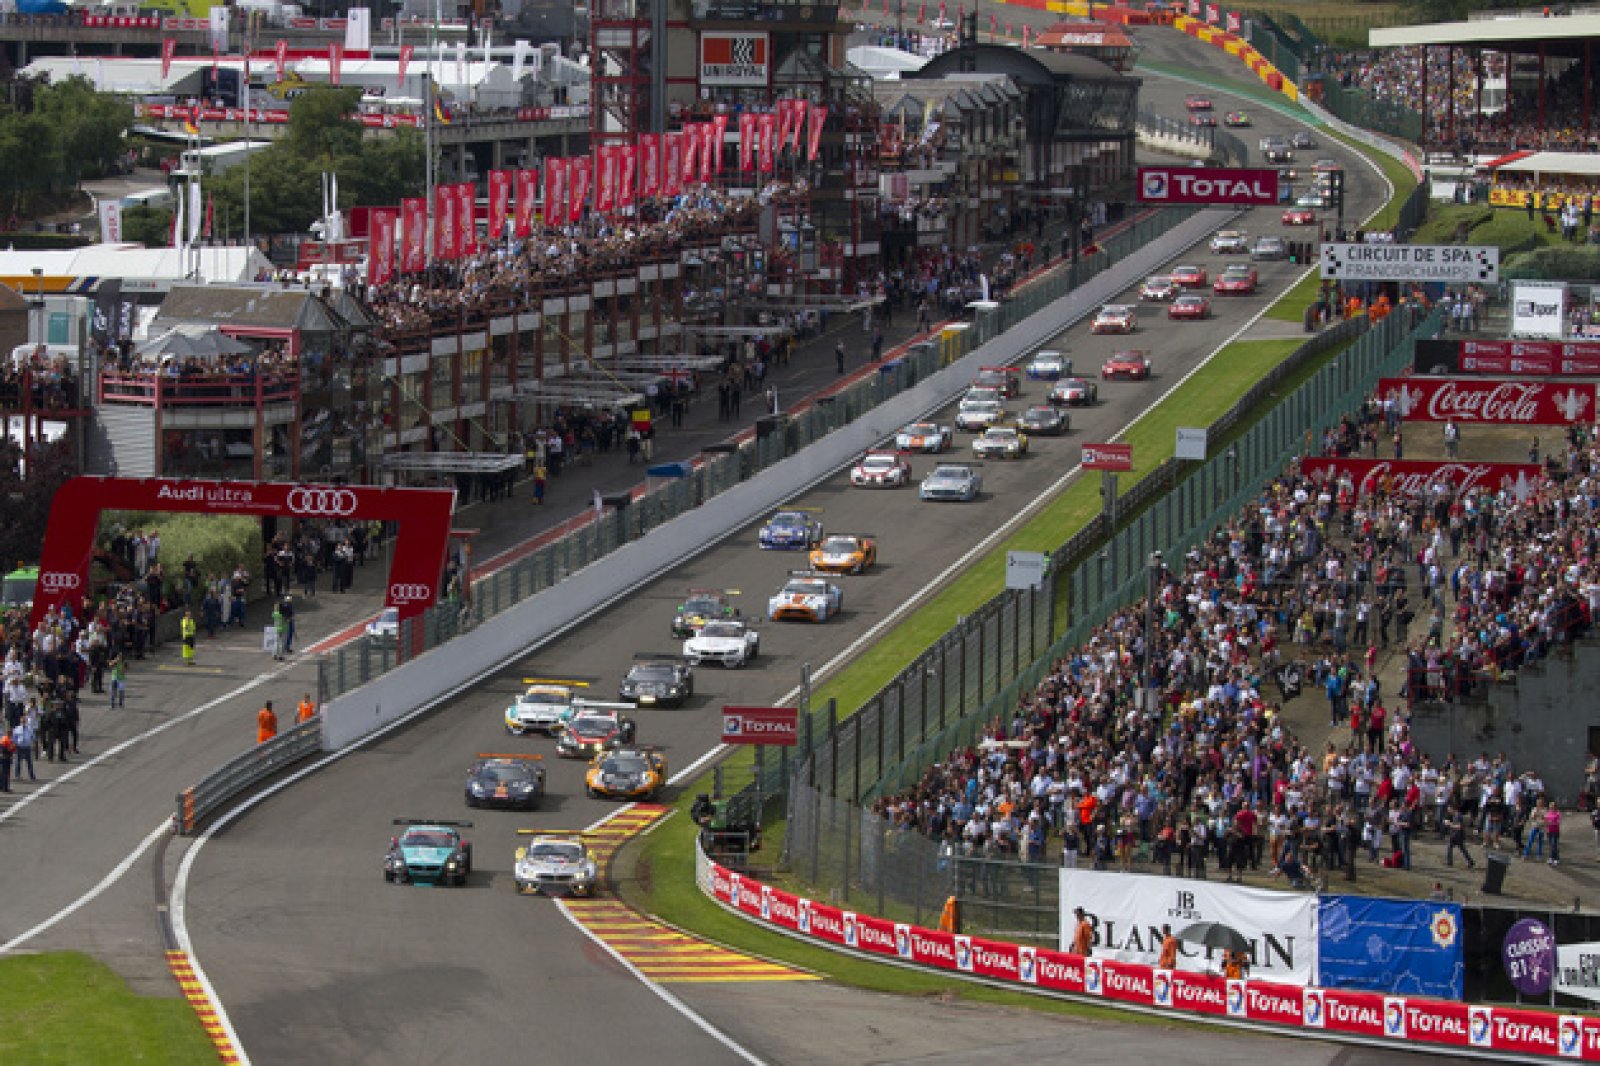 SENSATIONAL ENTRY FOR 2013 TOTAL 24 HOURS OF SPA